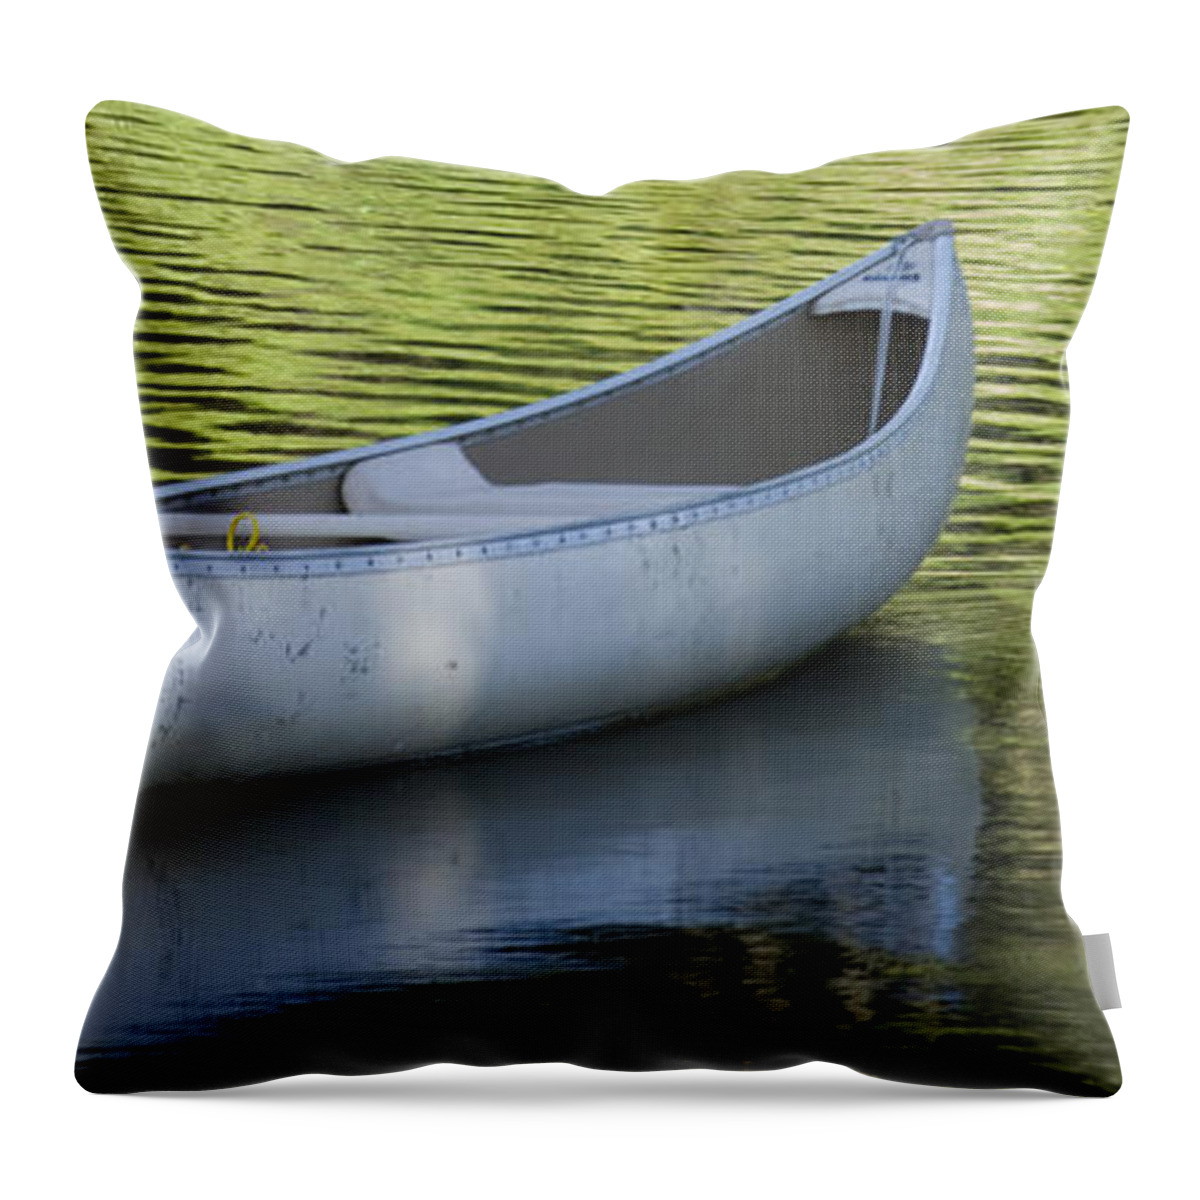 Green Water Throw Pillow featuring the photograph Green Water by Idaho Scenic Images Linda Lantzy